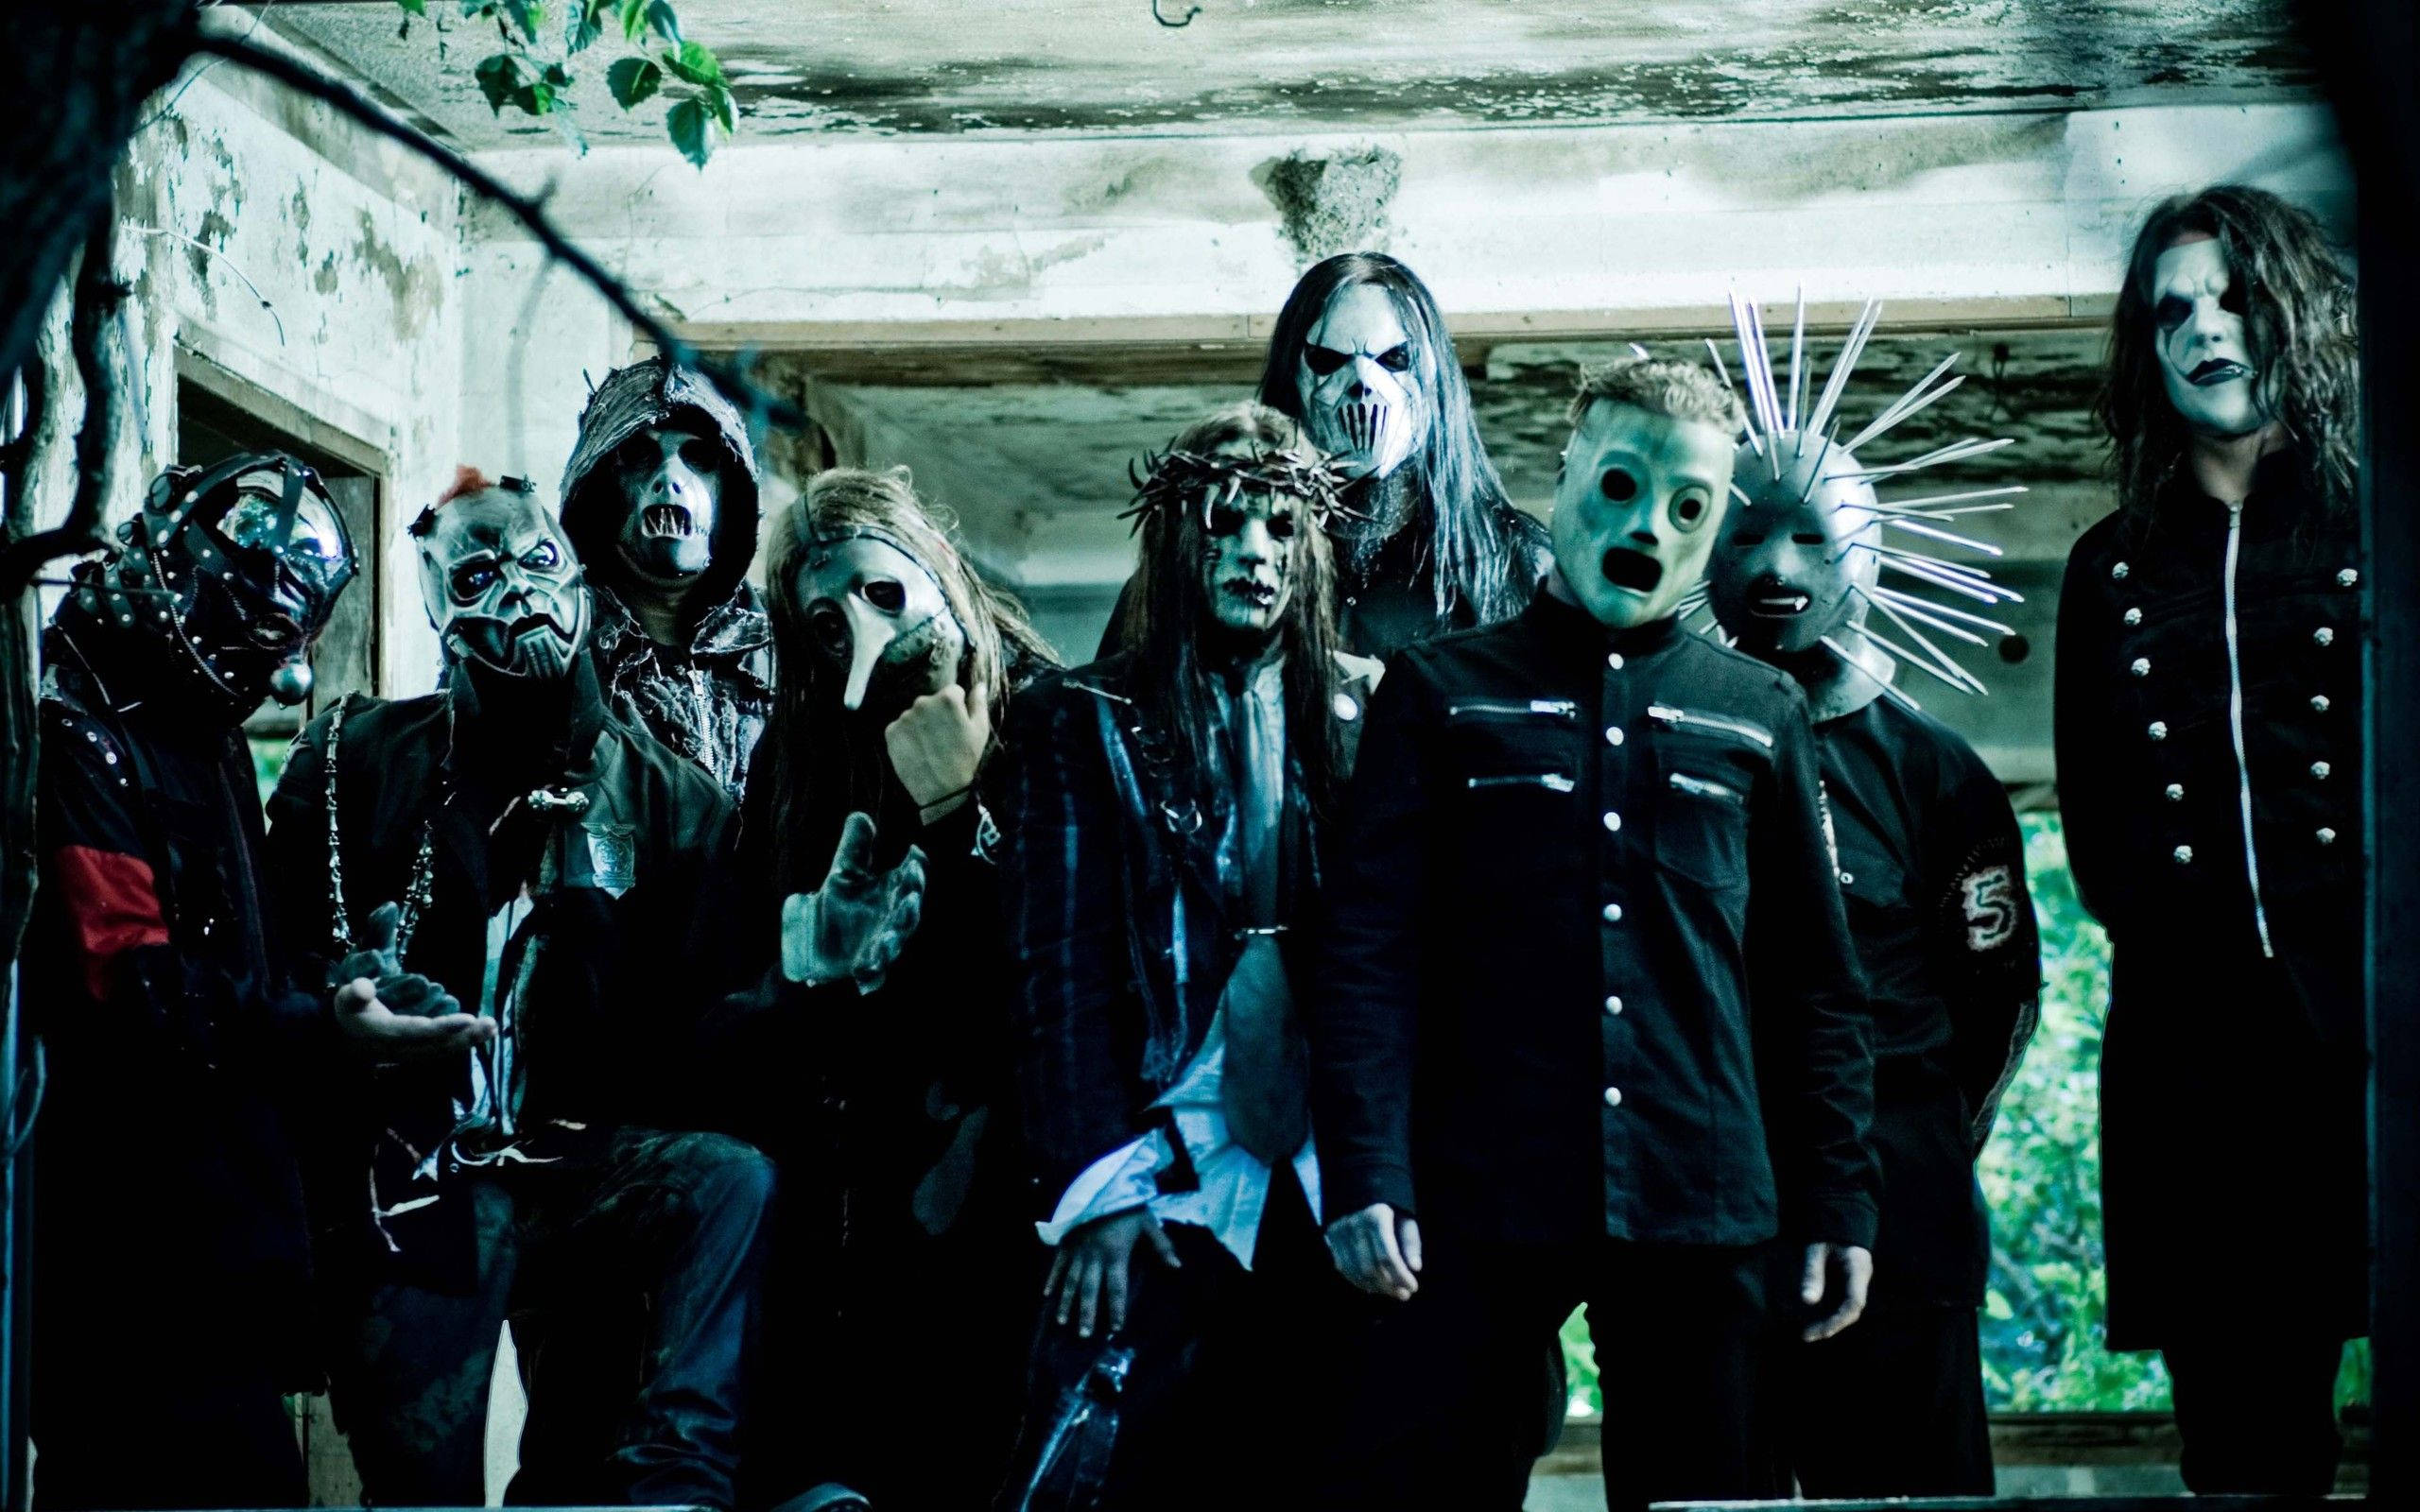 Slipknot Members At Abandoned Building Background